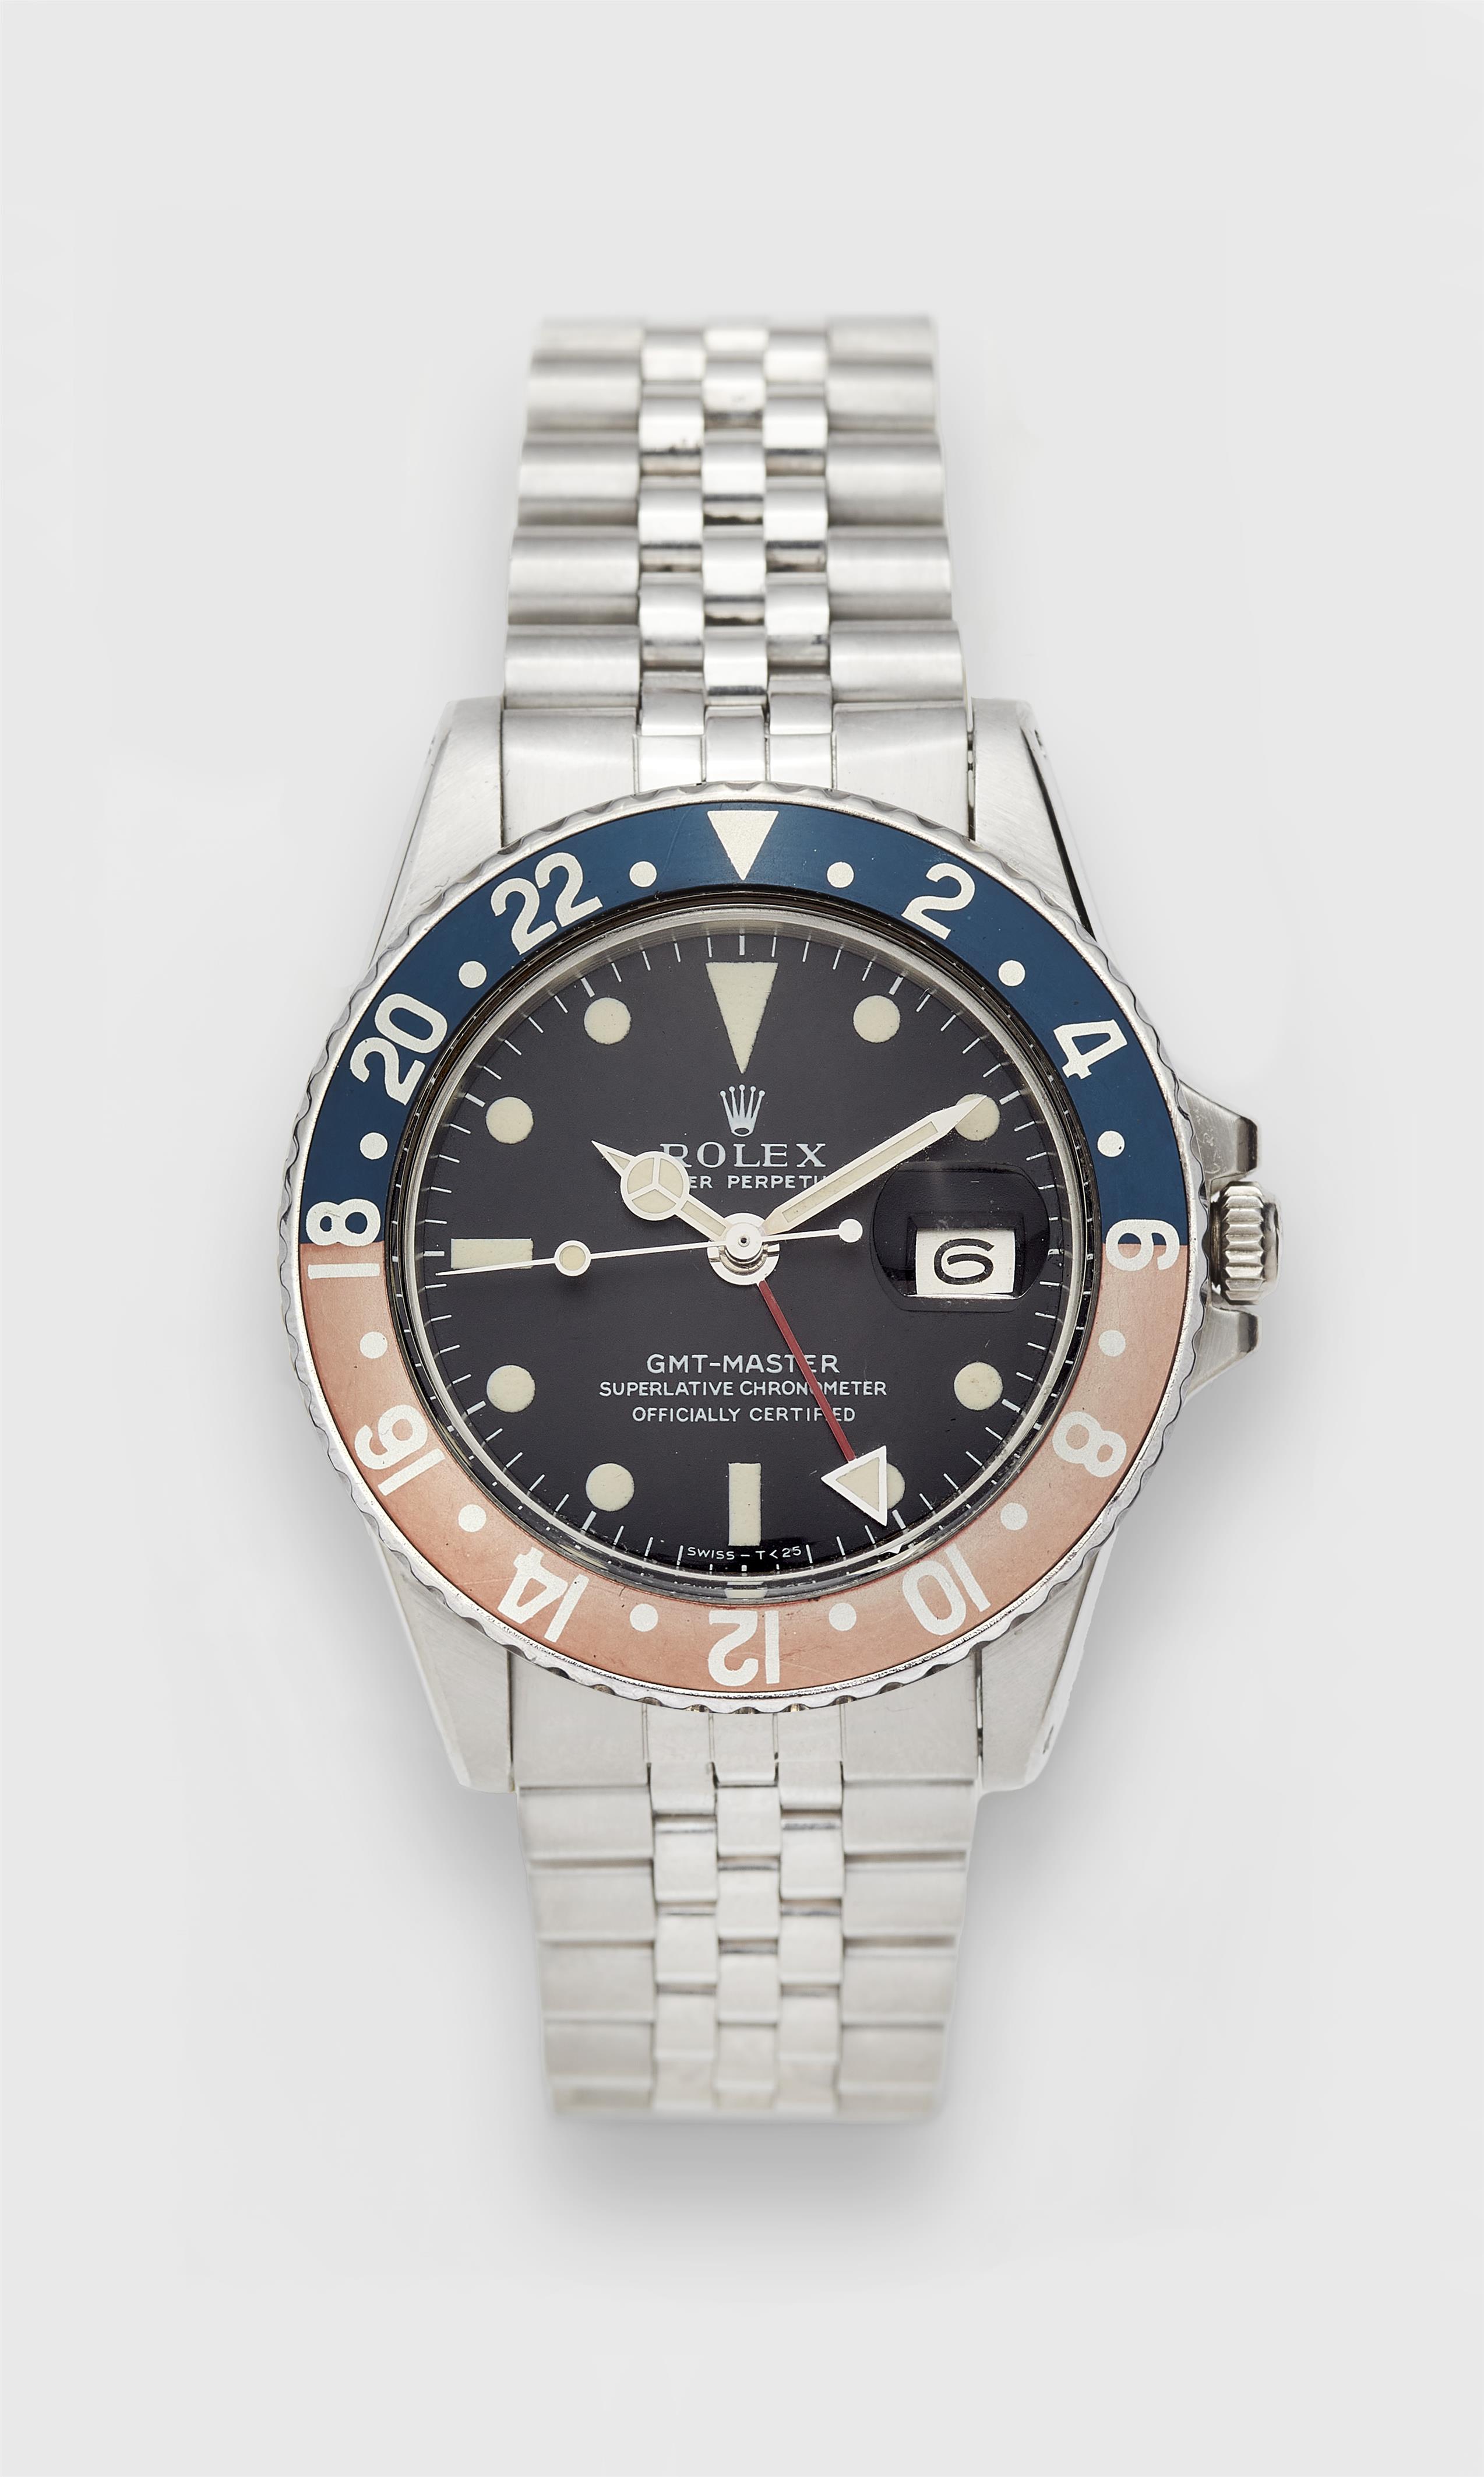 A stainless steel Rolex GMT Master Pepsi "Long E" wristwatch Ref. 1675. Non original Rolex box, exchangeable black bezel, replacement glass with sealing ring, hangtag, two strap pins, punched chronometer certificate and instructions enclosed. - image-1